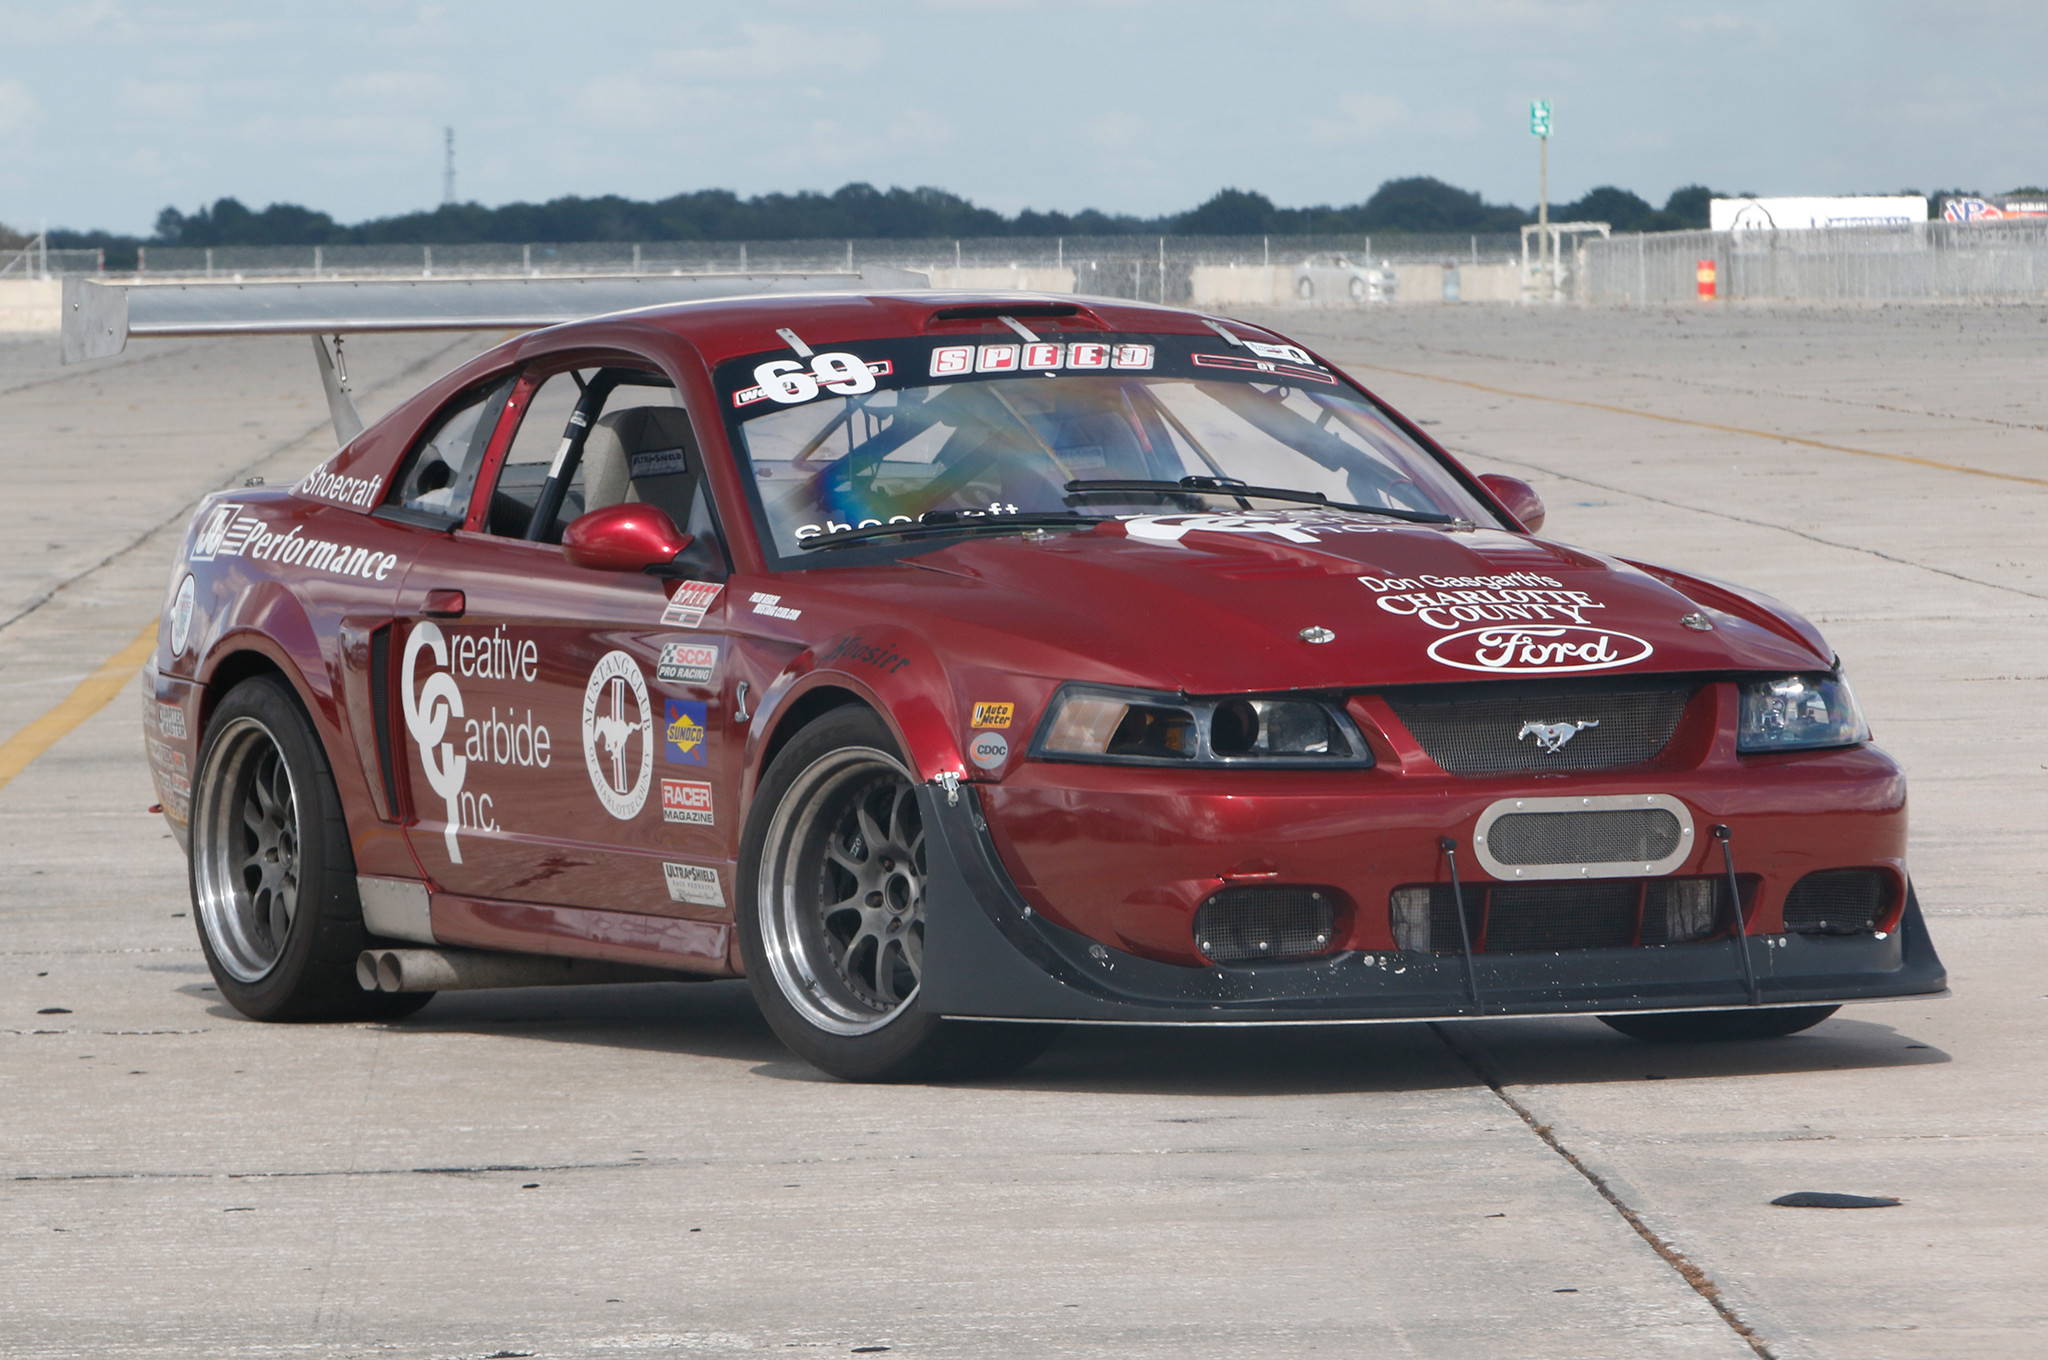 2048x1360 2003 Ford Mustang: A Road Race Terminator Cobra That Brings the Family  Together Photo & Image Gallery